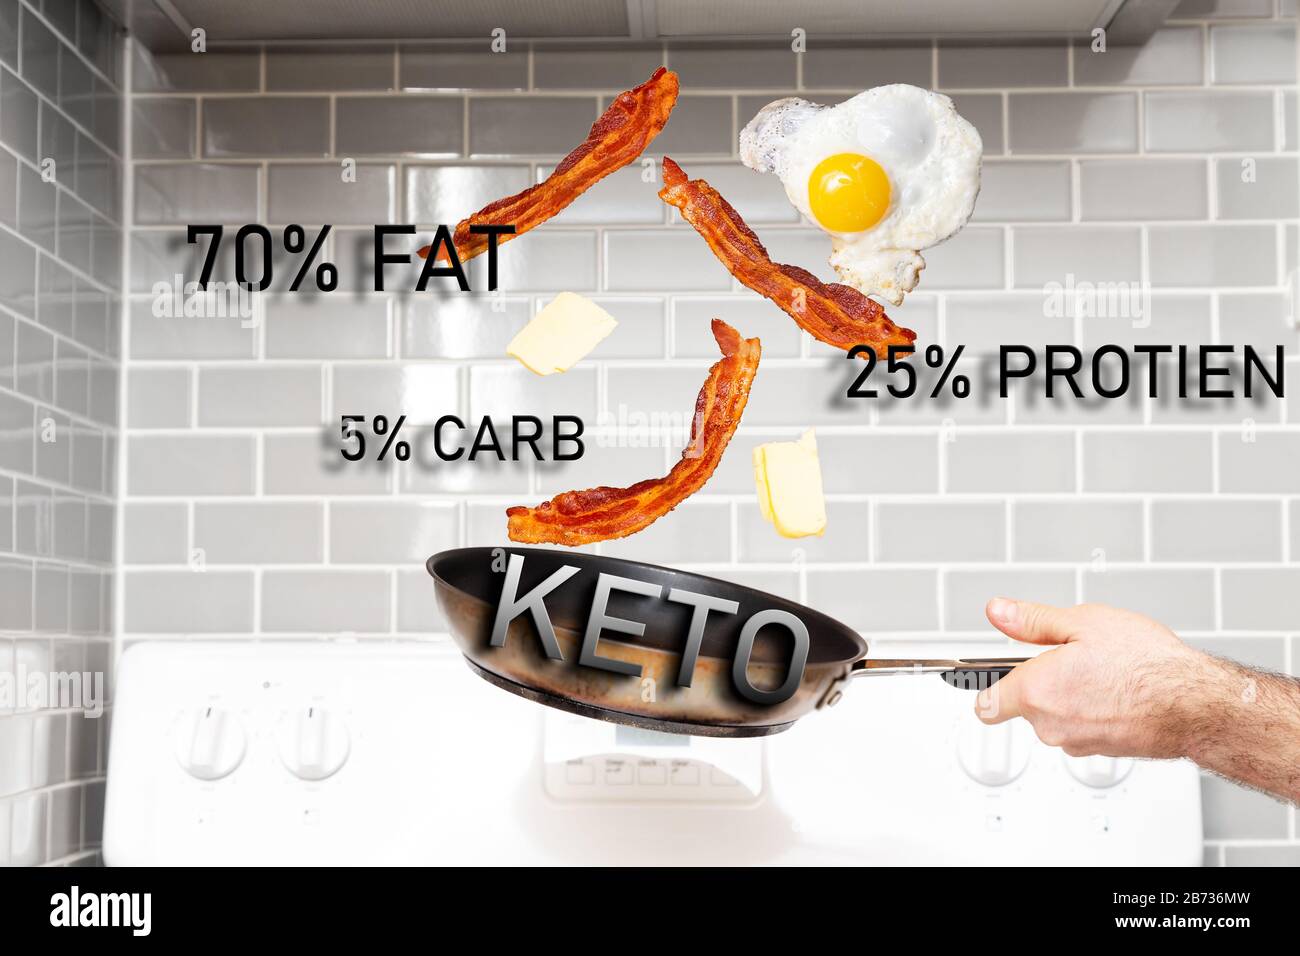 Floating egg, bacon, and butter above a frying pan with percentages representing the macronutrient ratios for the ketogenic diet. Stock Photo